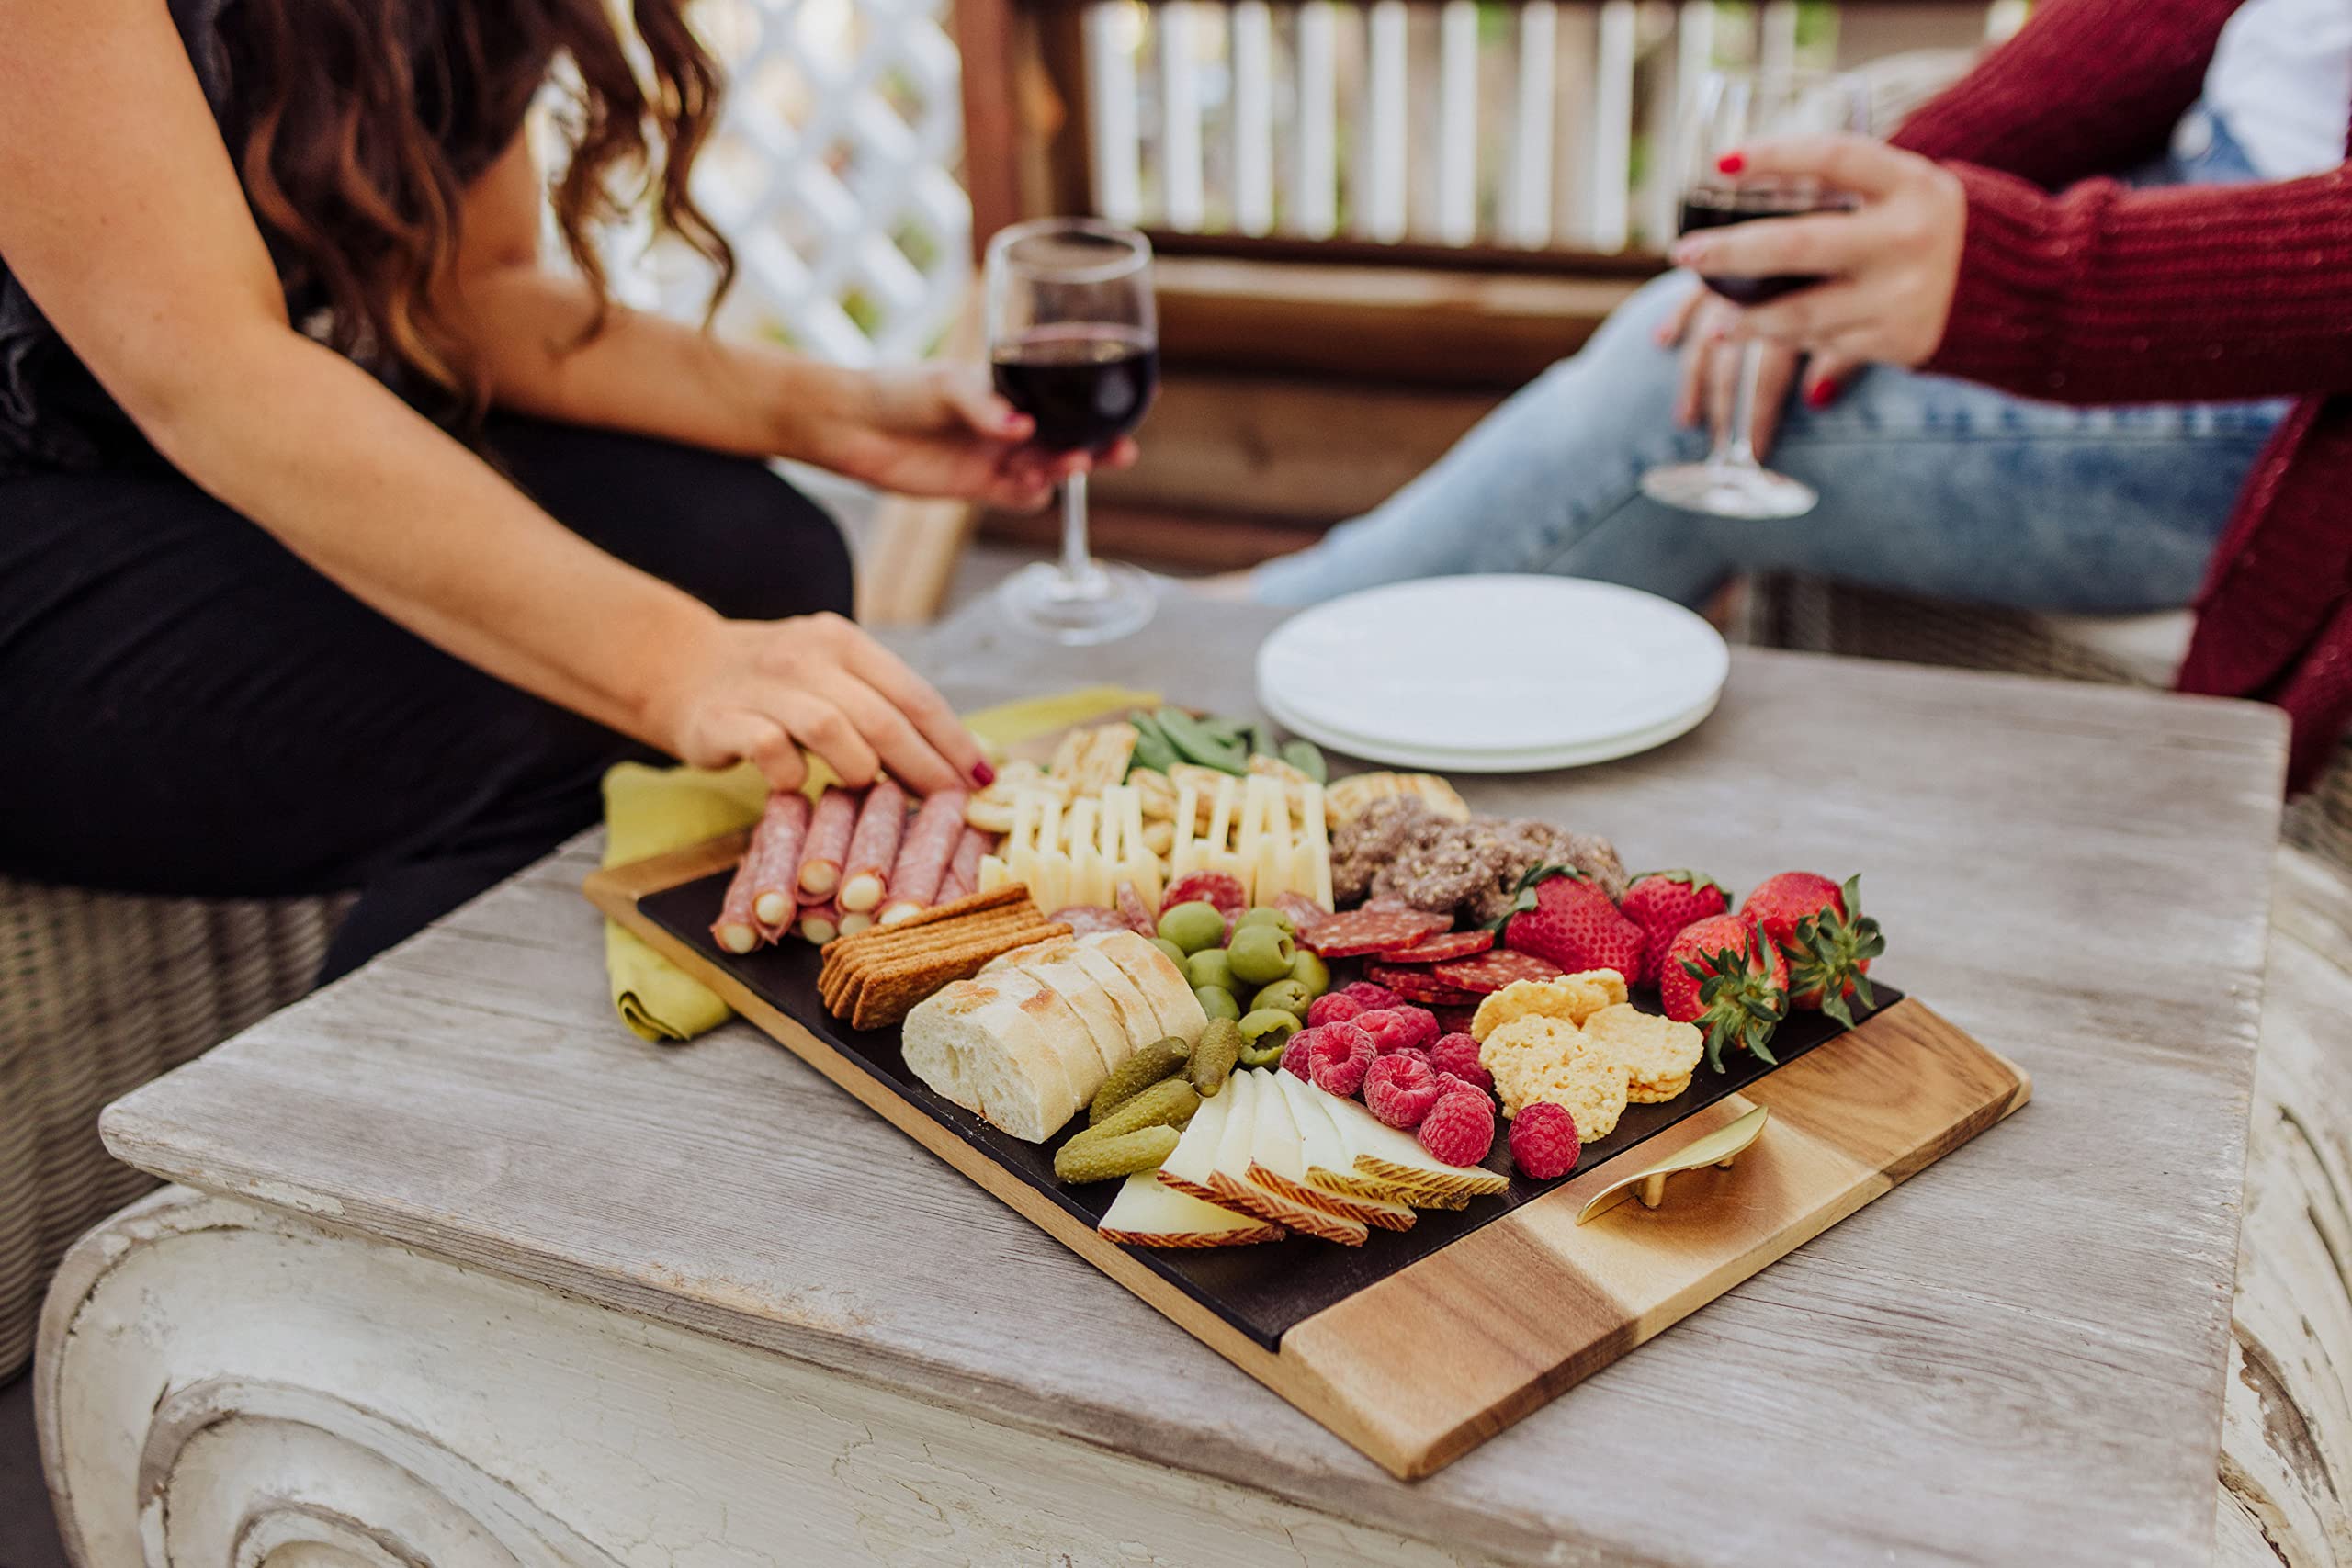 PICNIC TIME NCAA Wake Forest Demon Deacons Covina Acacia and Slate Serving Tray, Charcuterie Board Set, (Acacia Wood & Slate Black with Gold Accents)